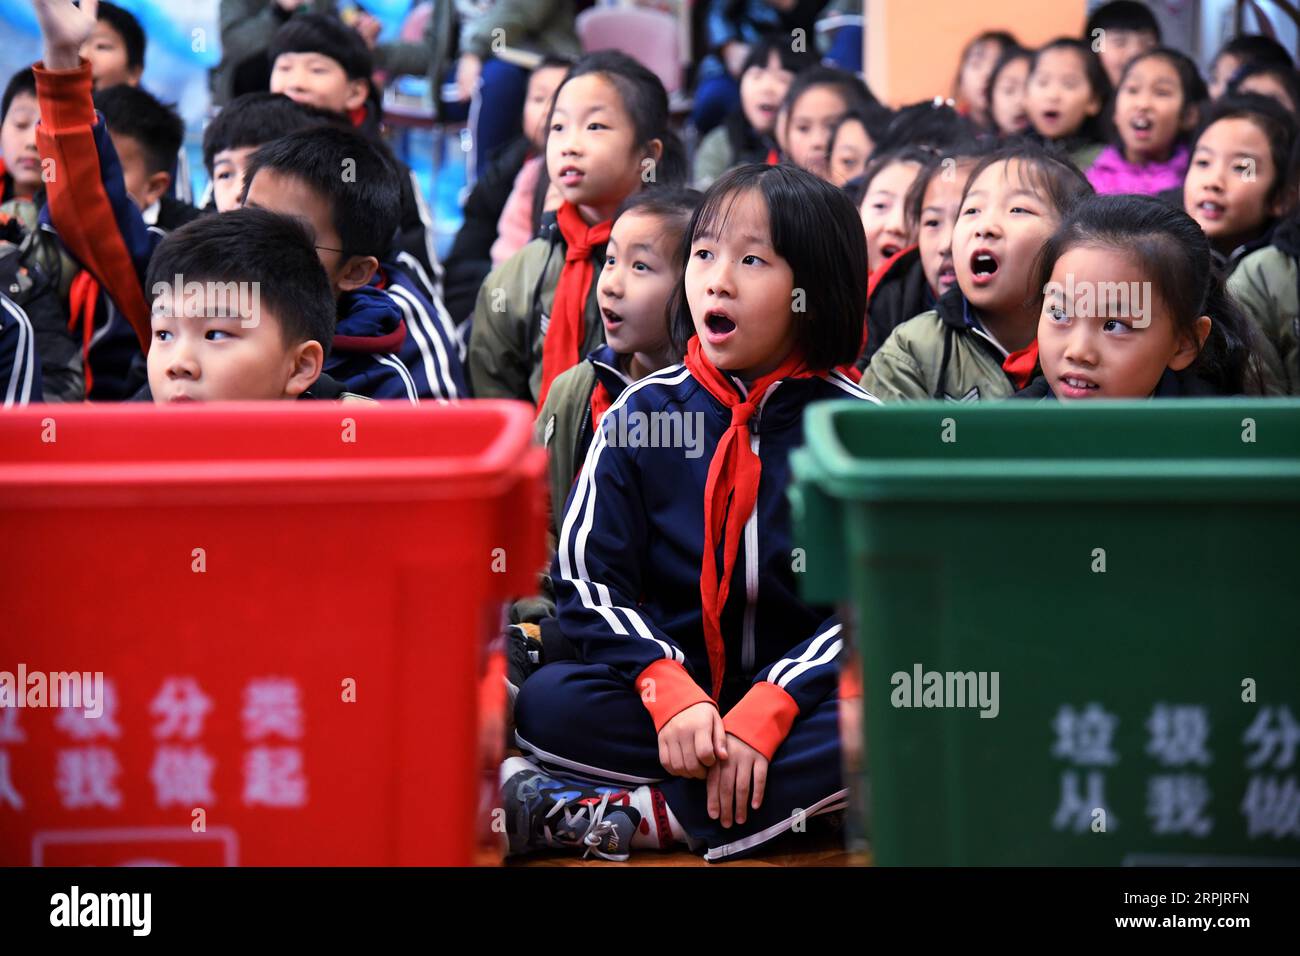 191218 -- QINGDAO, Dec. 18, 2019 -- Pupils learn about garbage classification at the Juyuan Primary School in Qingdao City, east China s Shandong Province, Dec. 18, 2019. Youth volunteers for social service from the Qingdao Zhanqiao Bookstore launched a scientific information outreach program at the Juyuan Primary School Wednesday. Through video clips, knowledge contests, short dramas and amusing games, the volunteers attempted to help the pupils better understand the necessity of garbage classification as well as the importance of environmental and ecological protection.  CHINA-SHANDONG-QINGD Stock Photo